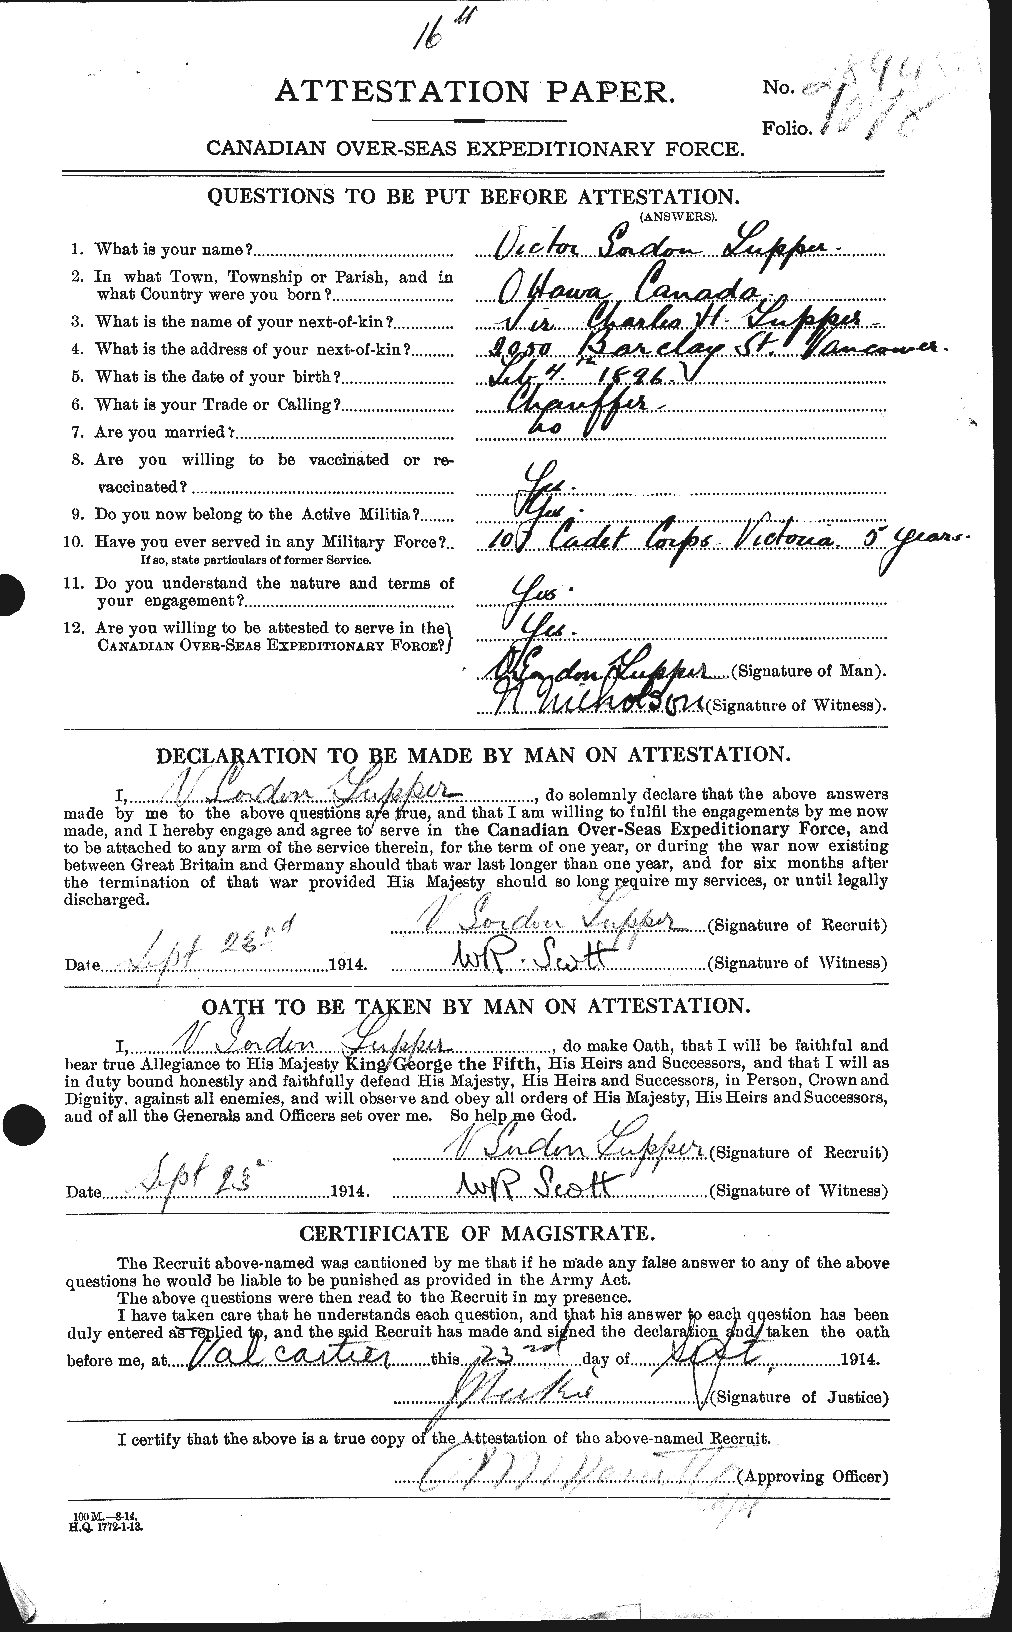 Personnel Records of the First World War - CEF 641394a